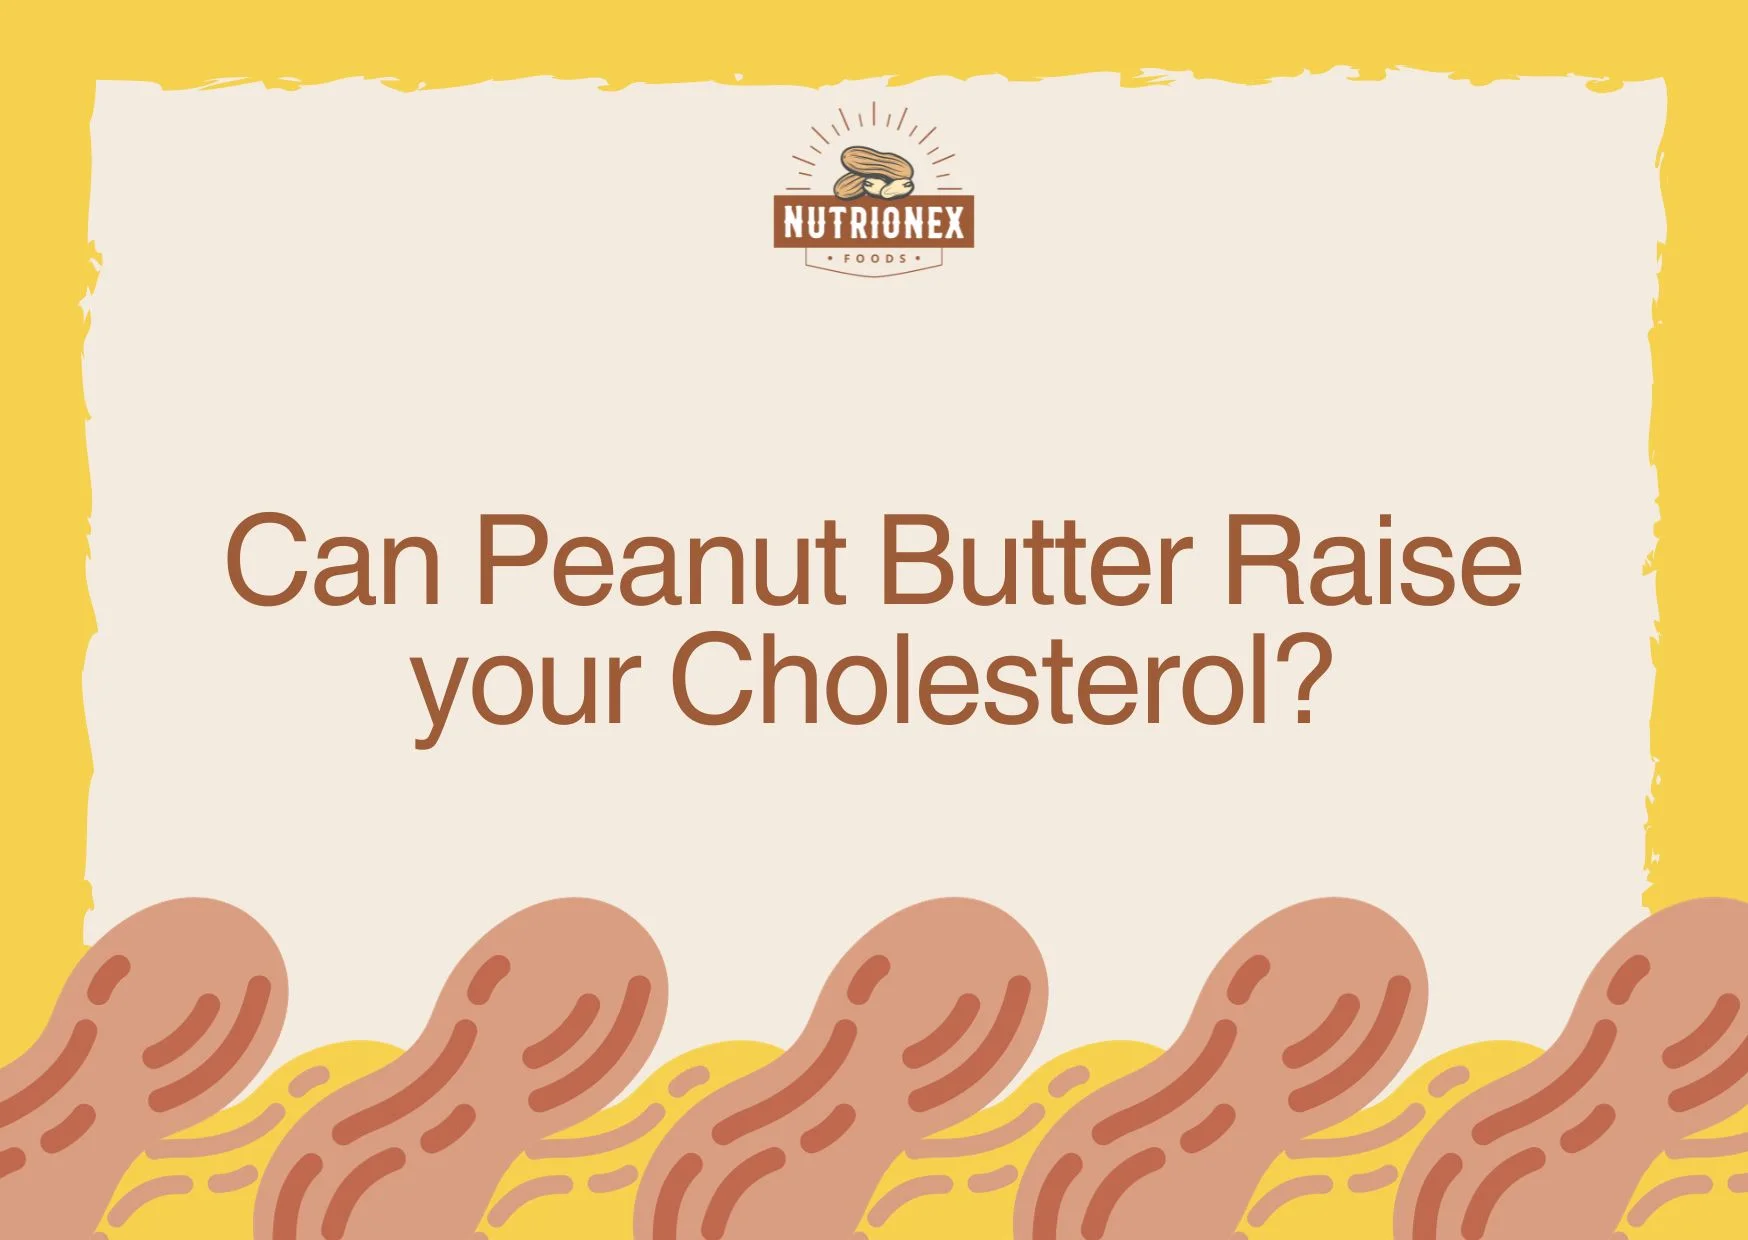 Can Peanut Butter Raise Your Cholesterol?